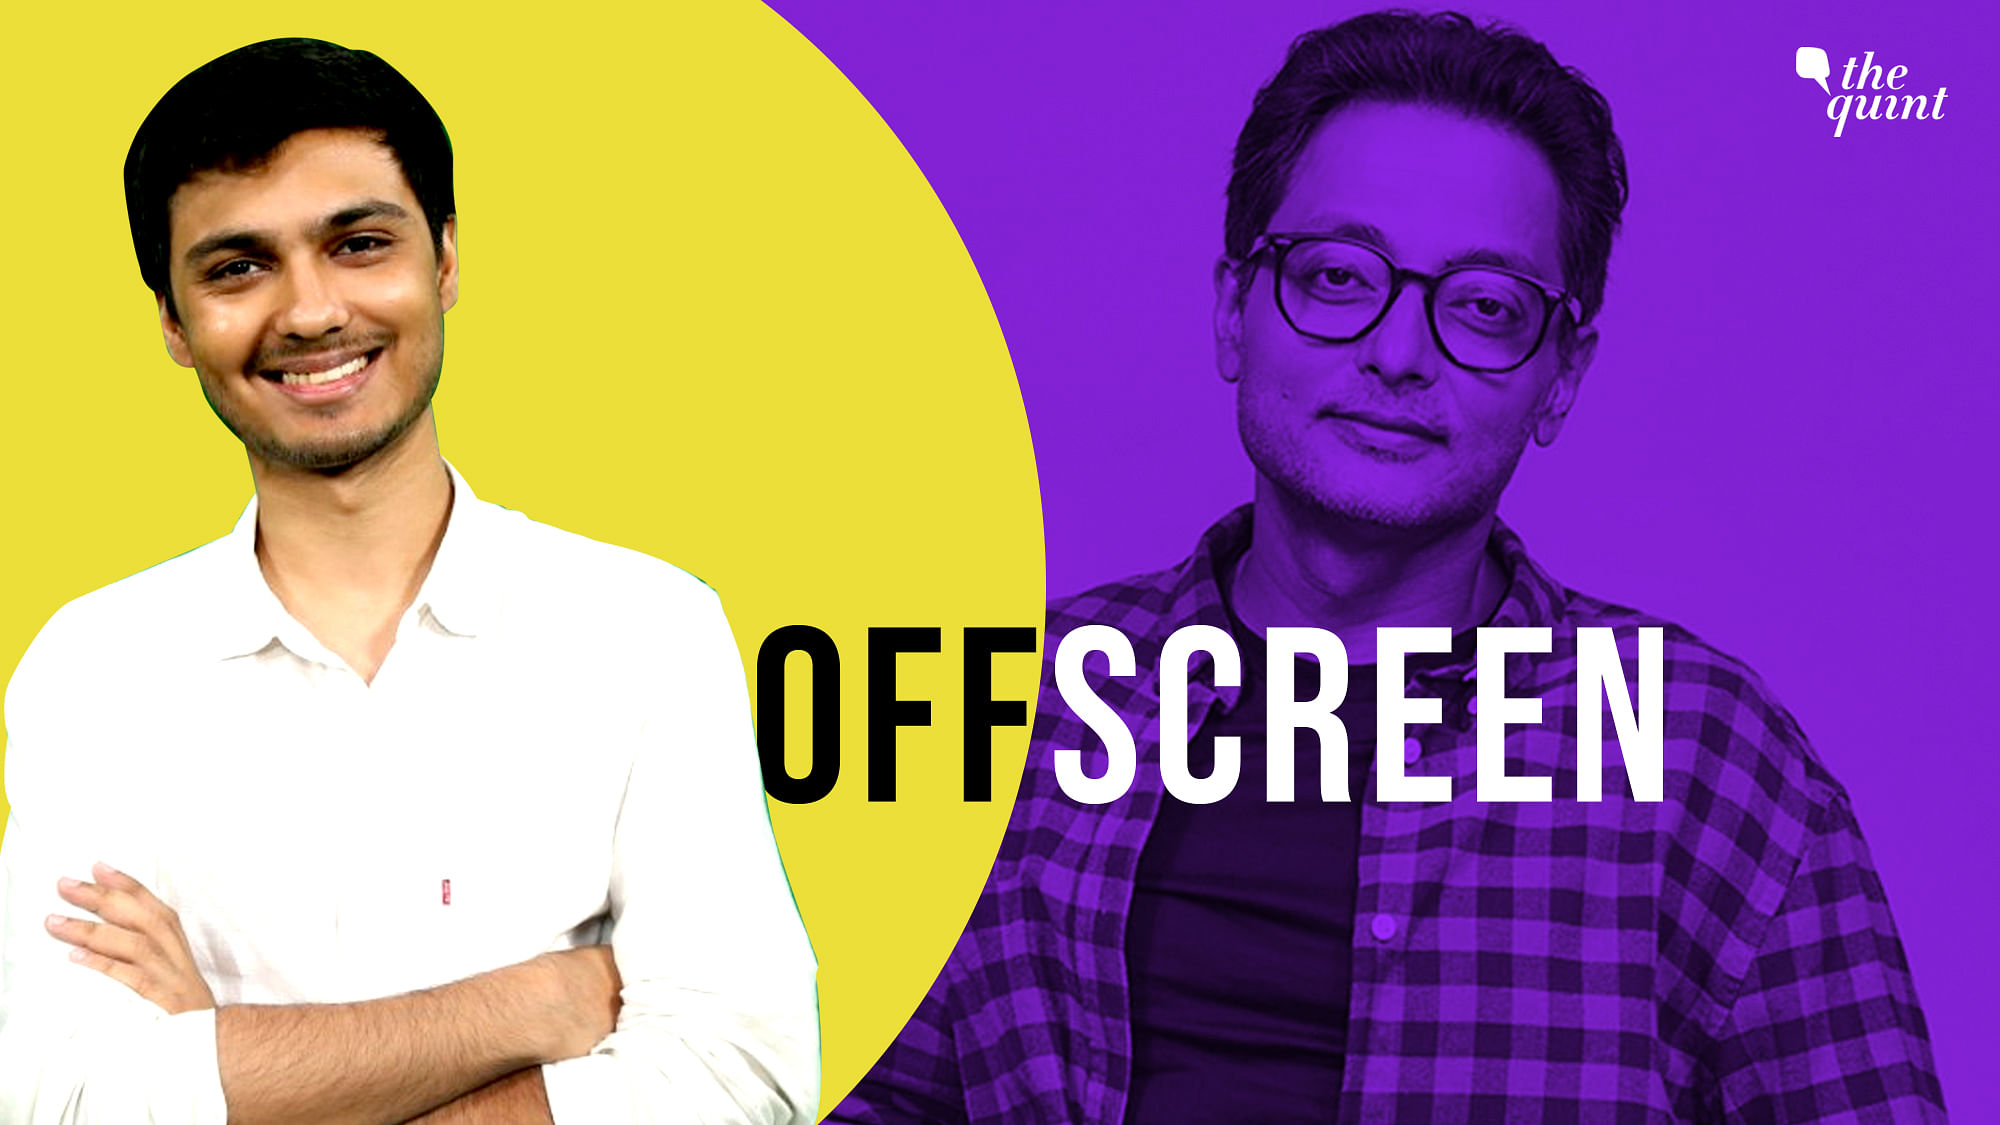 Filmmakers Sujoy Ghosh gets candid about his craft, pressures of Bollywood.